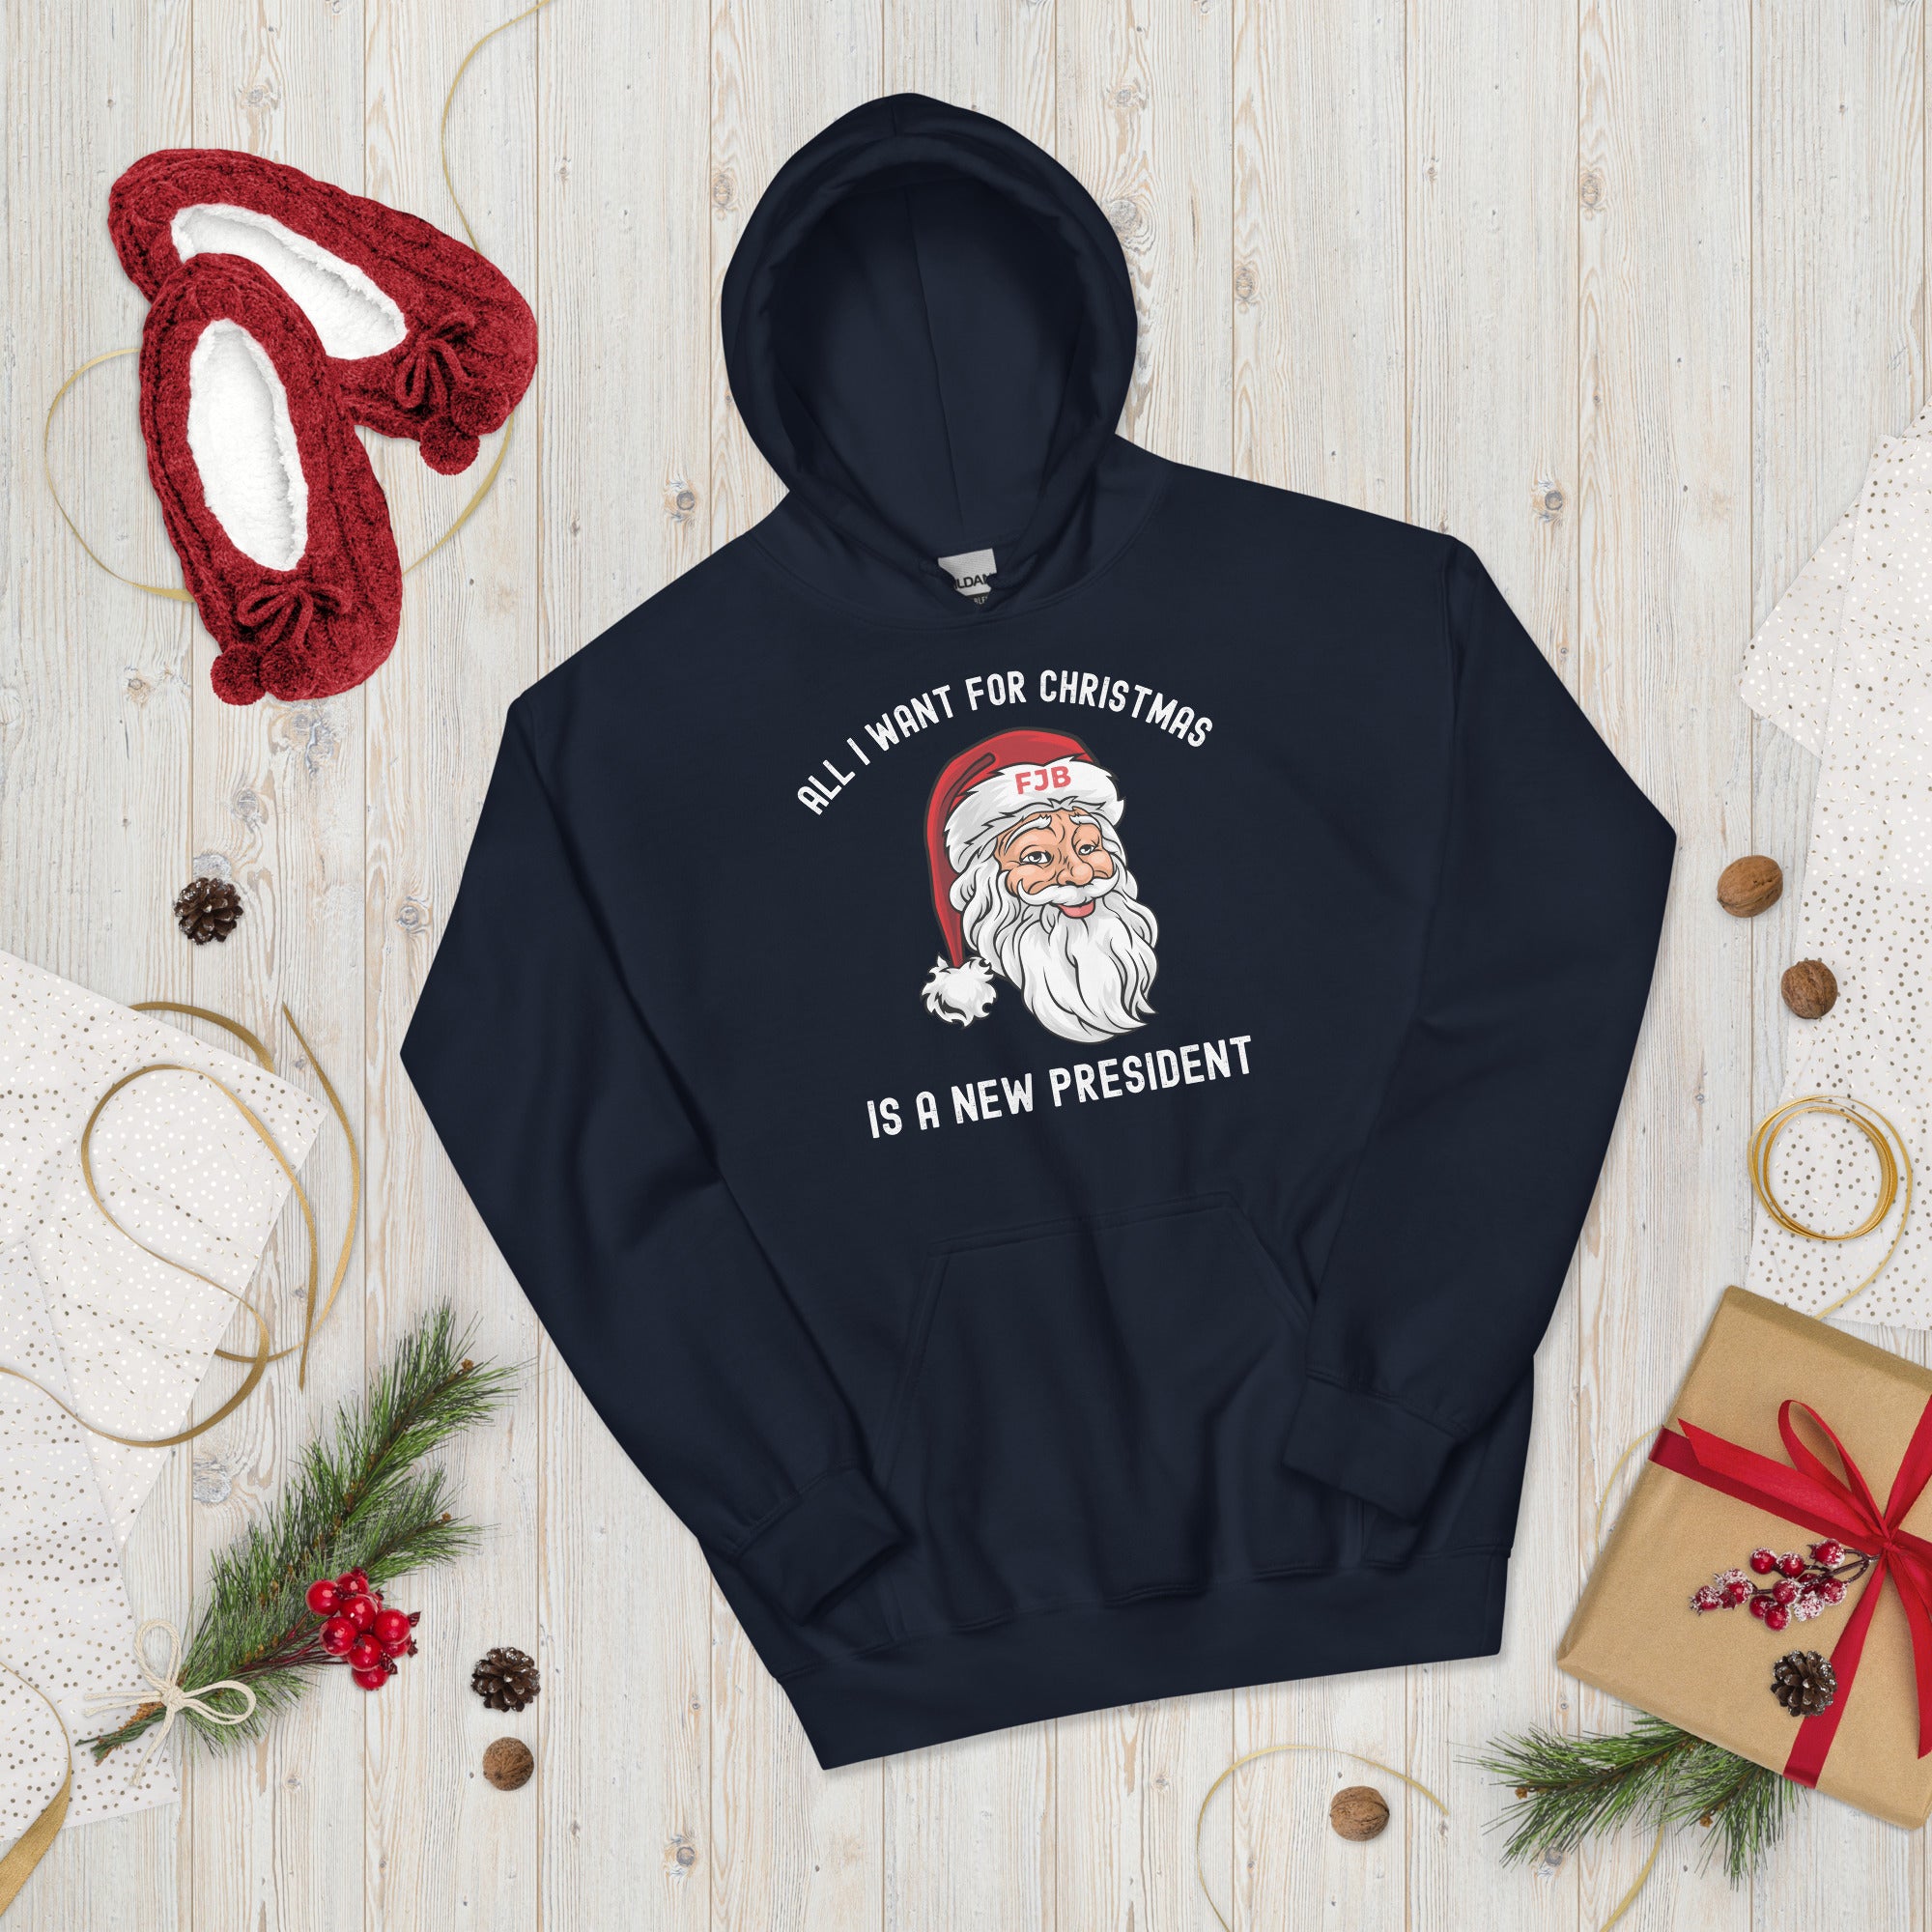 All I Want For Christmas Is A New President, Republican Christmas Hoodie, Xmas Conservative Hoodie, Impeach Biden Shirt, FJB Gift Hoodie - Madeinsea©